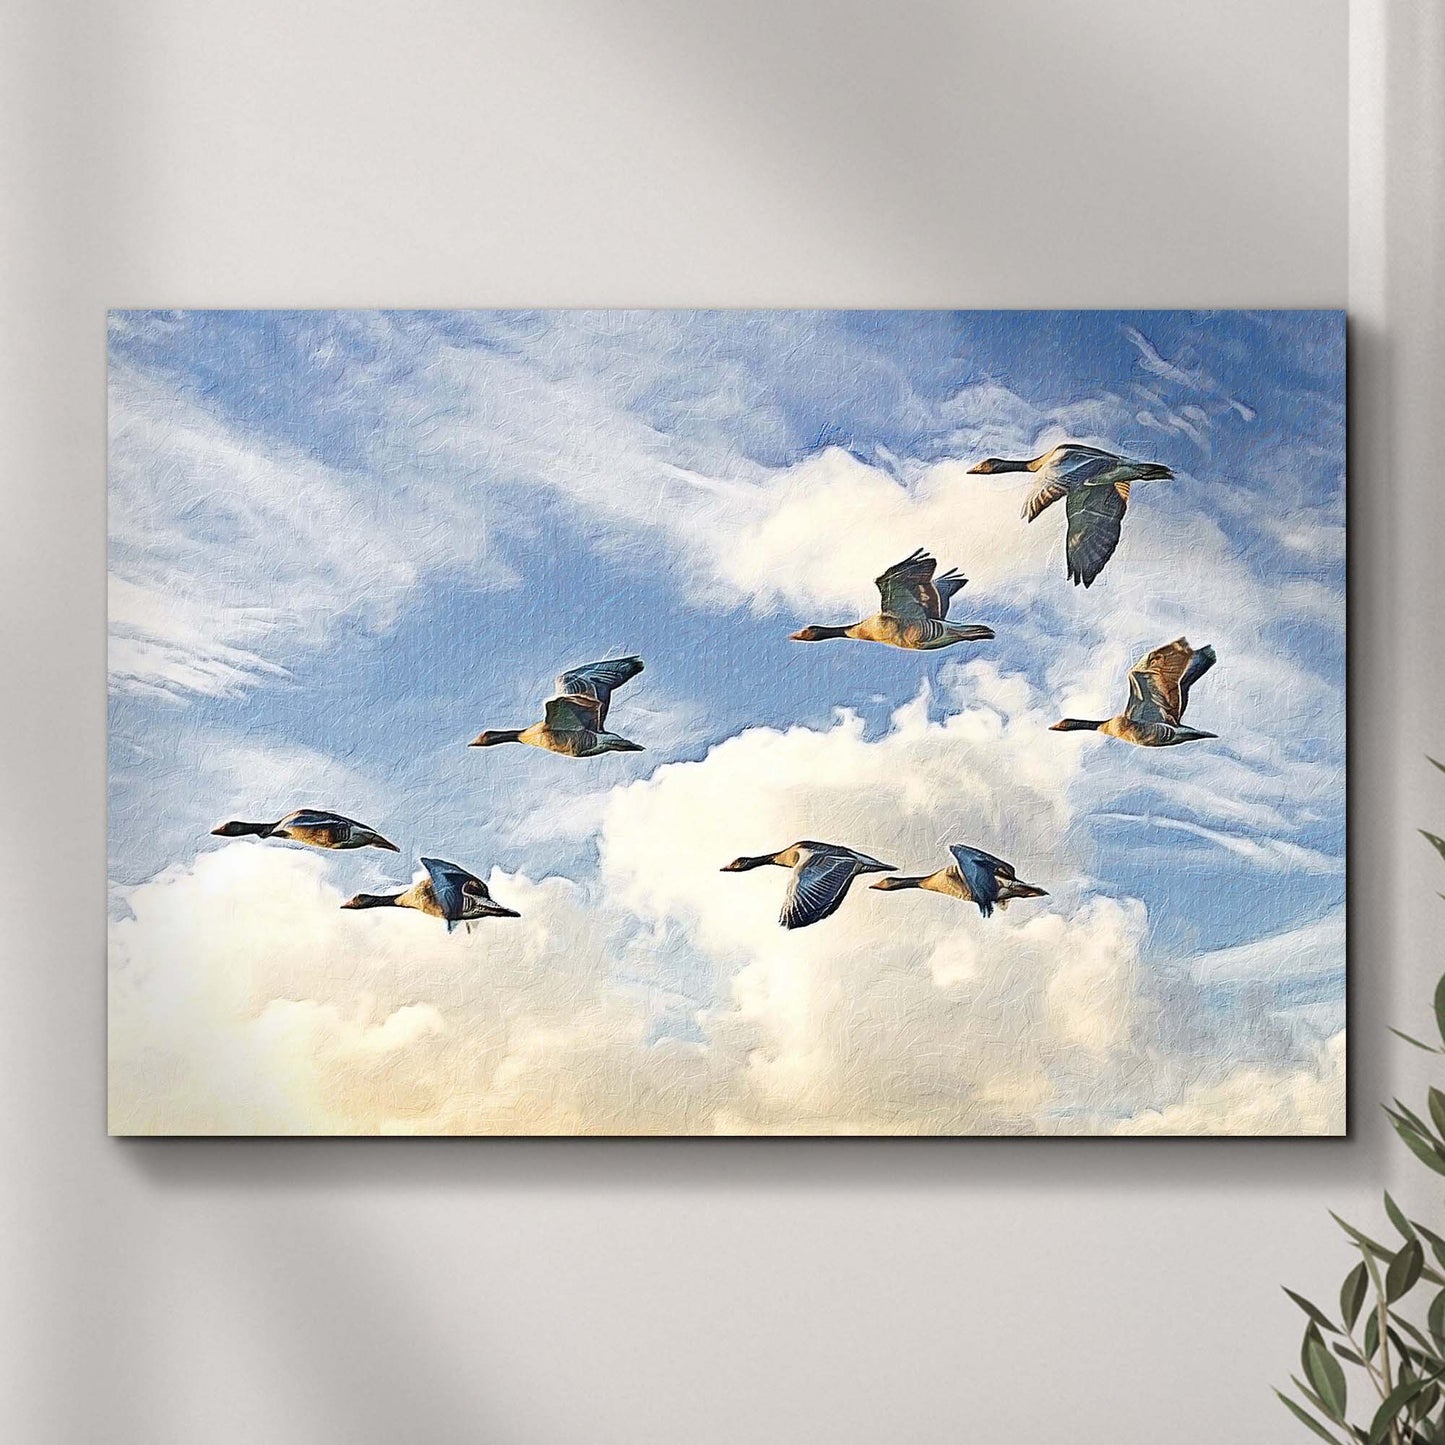 Flying Greylag Geese Canvas Wall Art - Image by Tailored Canvases